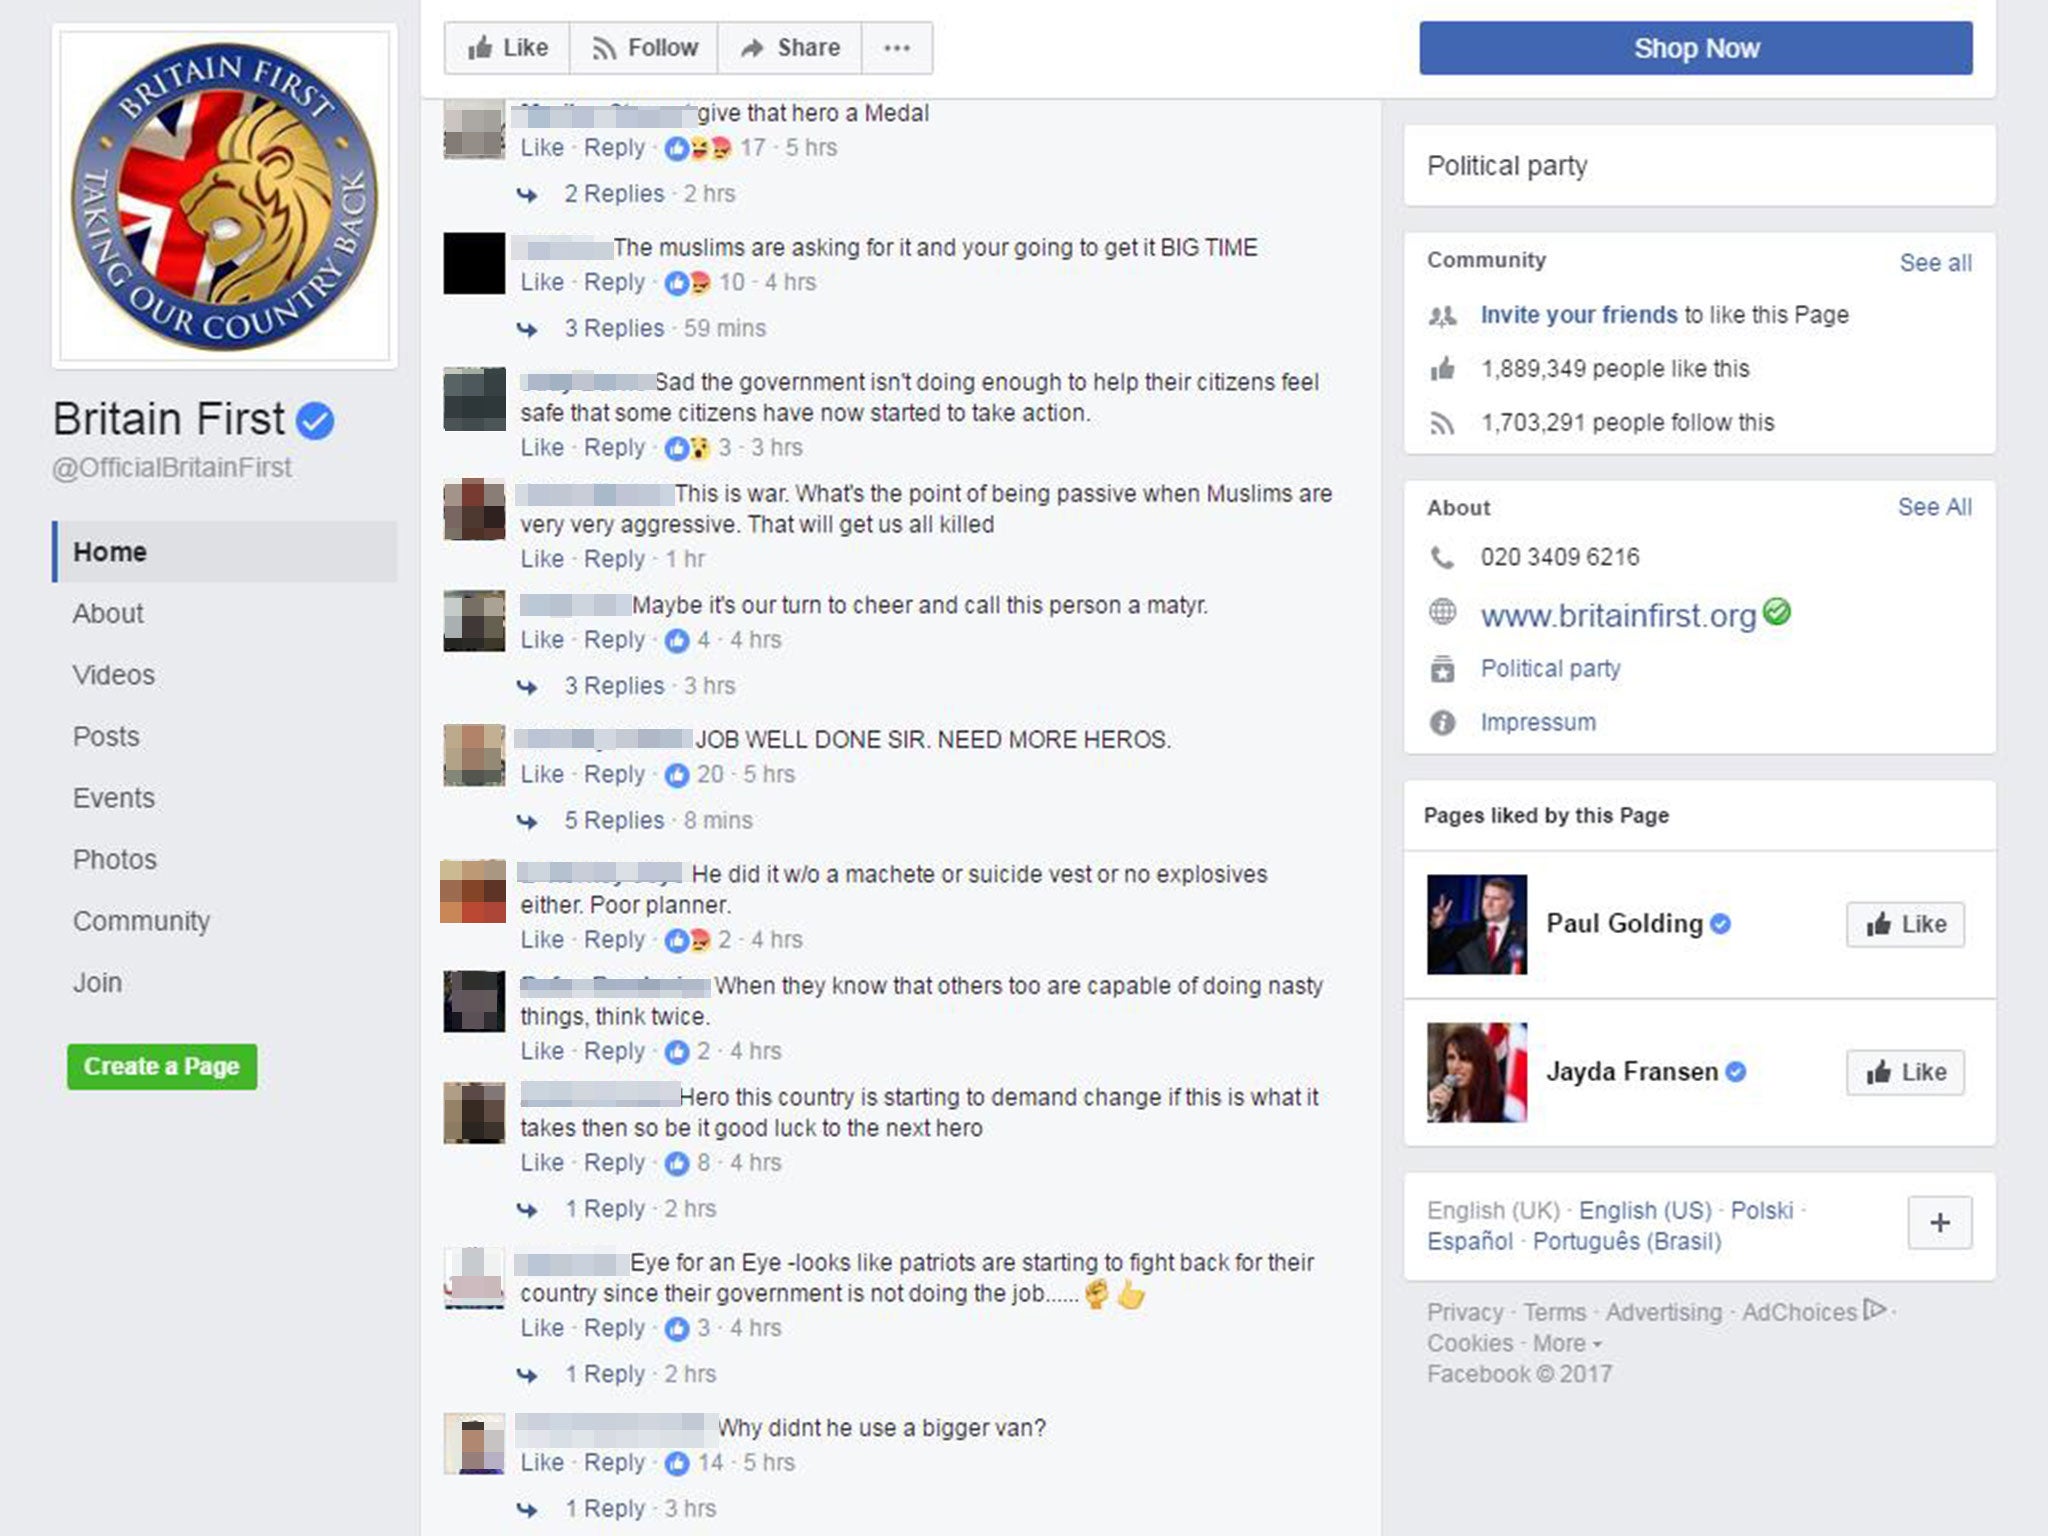 Comments posted on Britain First's Facebook page on 19 June